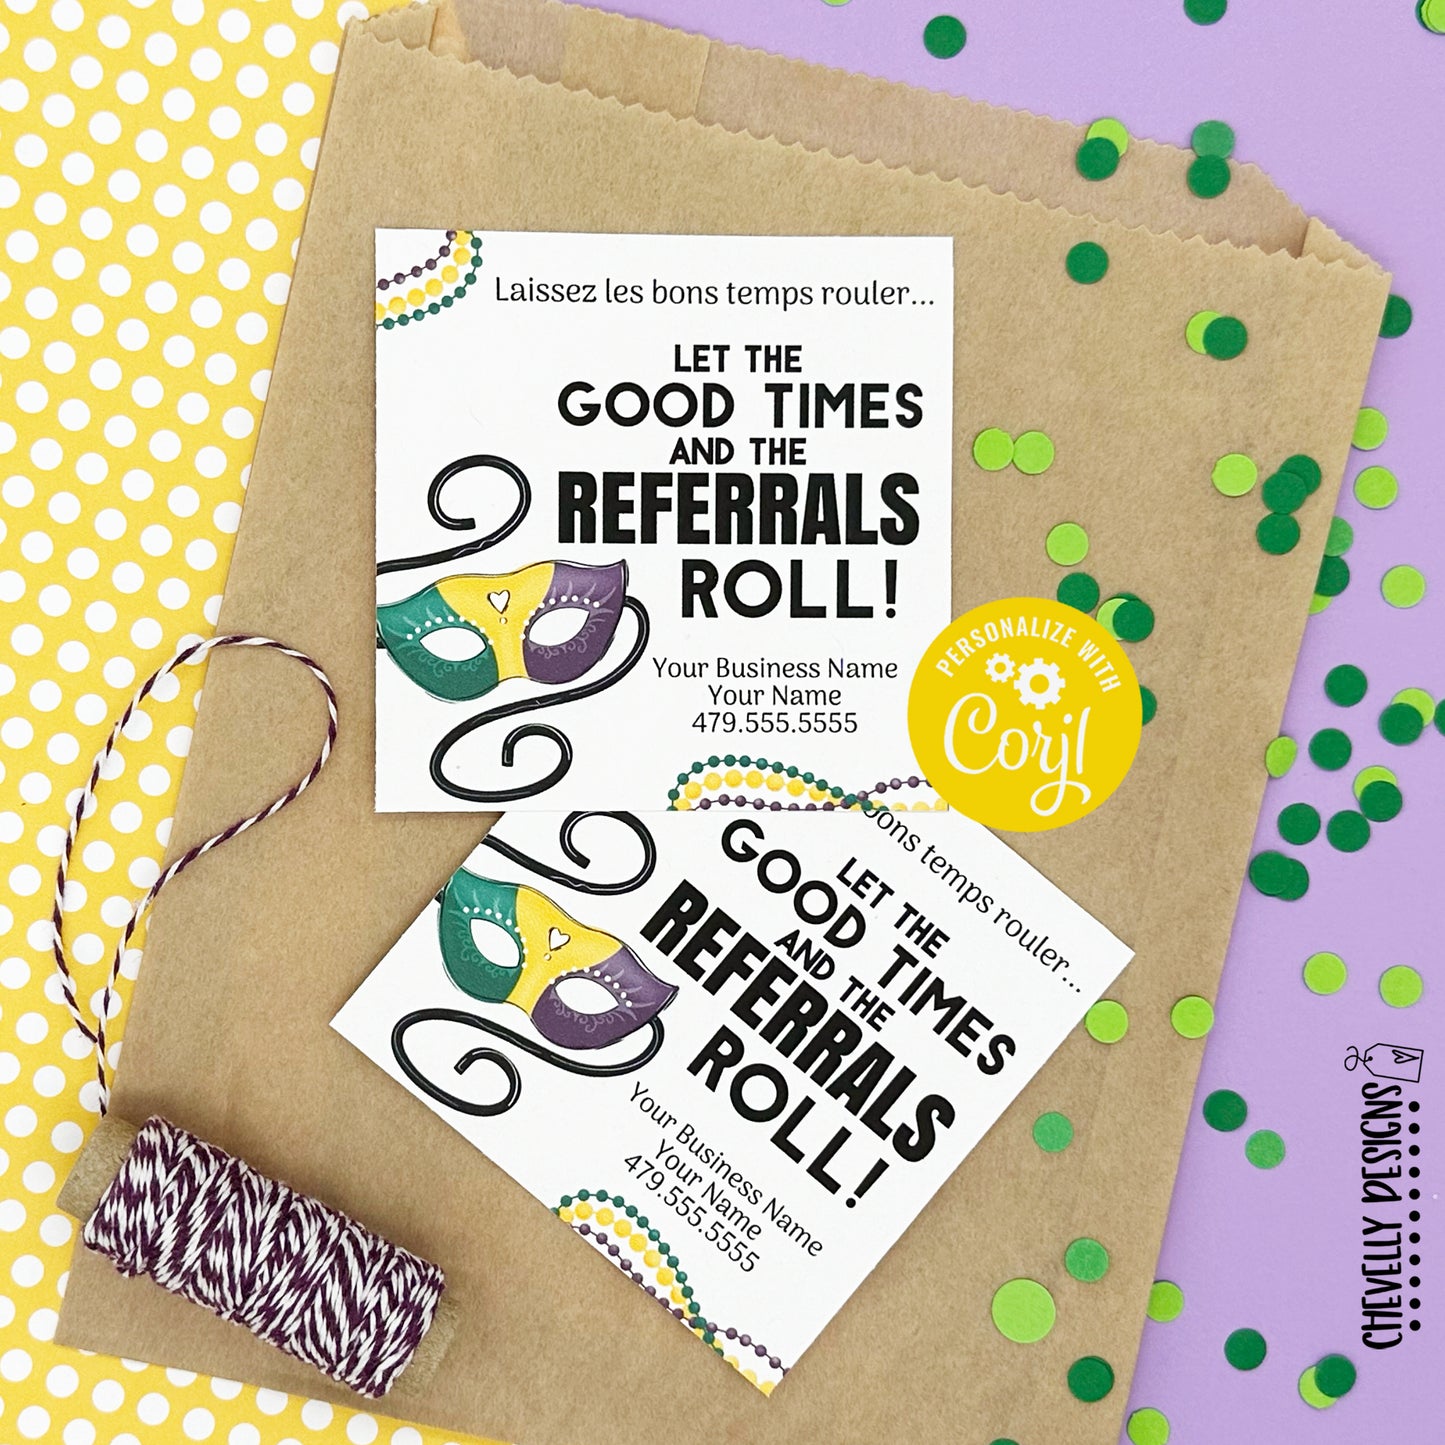 EDITABLE - Let the Good Times and Referrals Roll - Printable Mardi Gras Gift Tags - Digital File